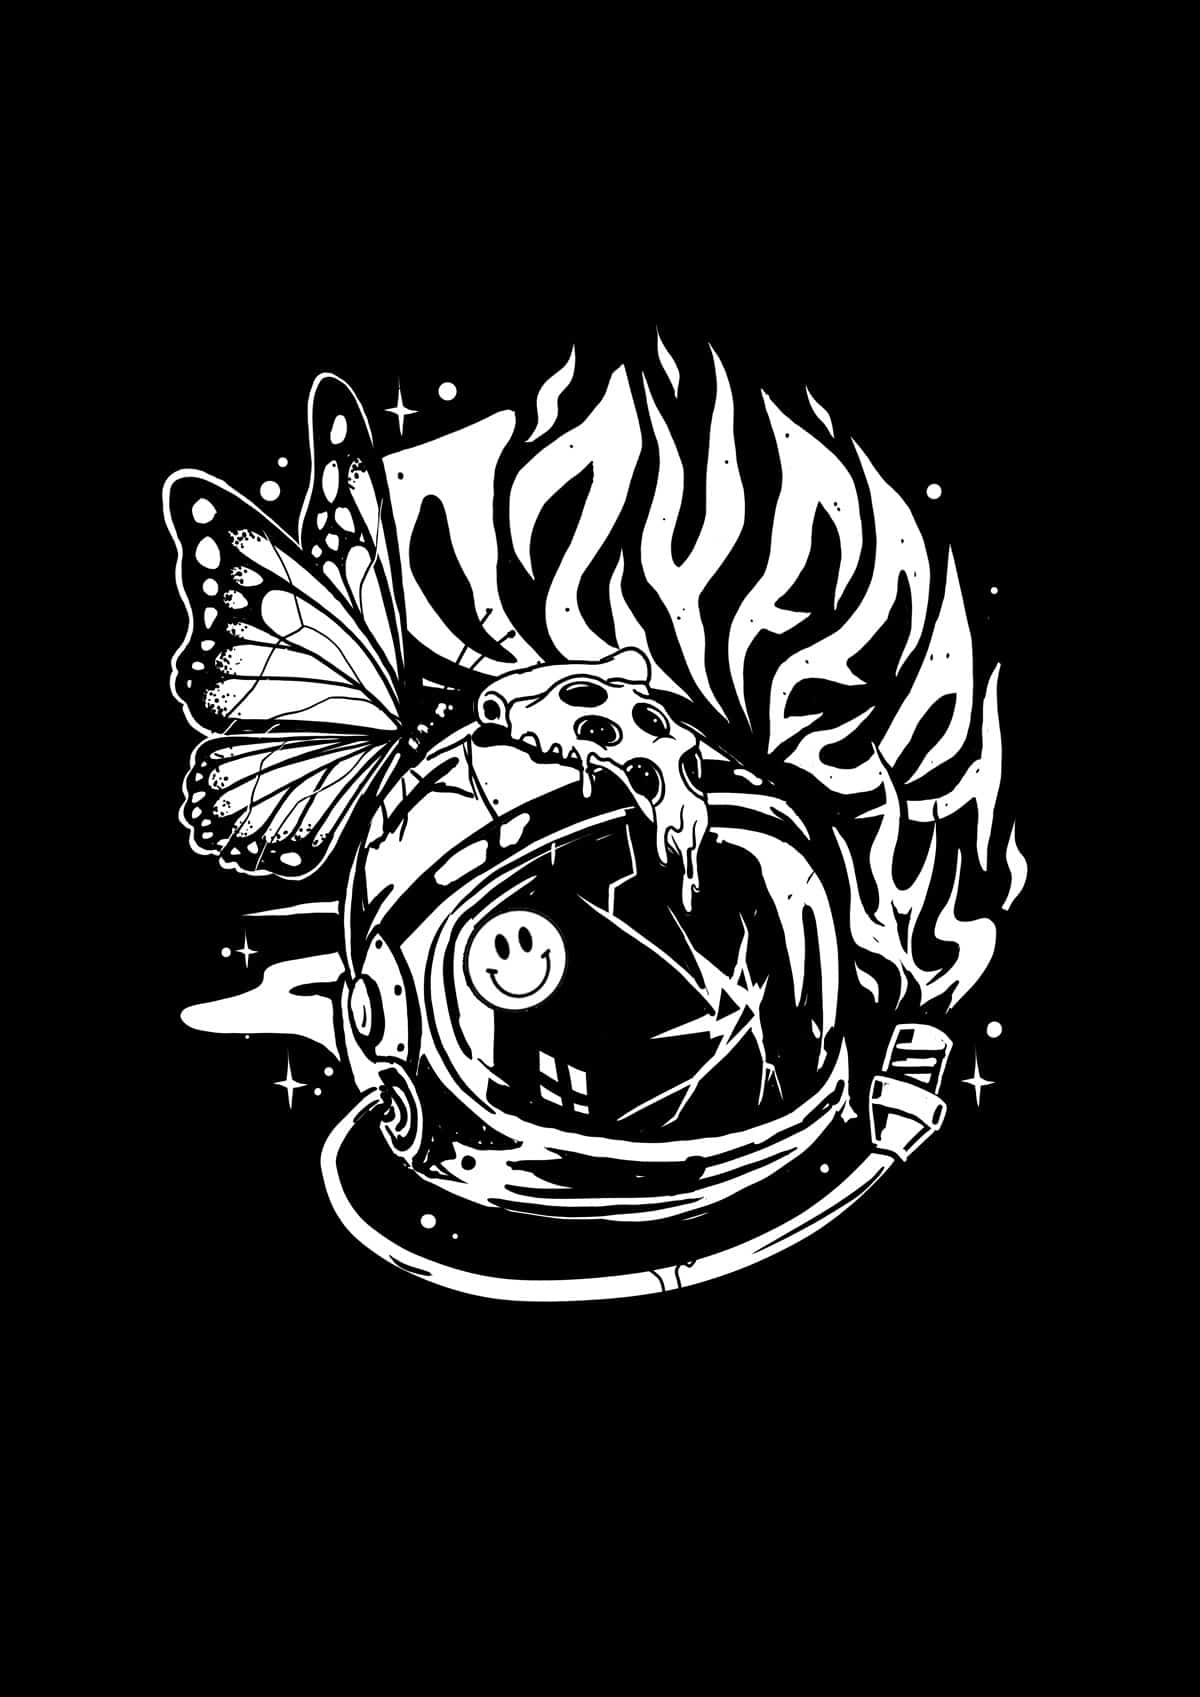 Ozyfest Illustrations – Astronaut Butterfly Black and White 003